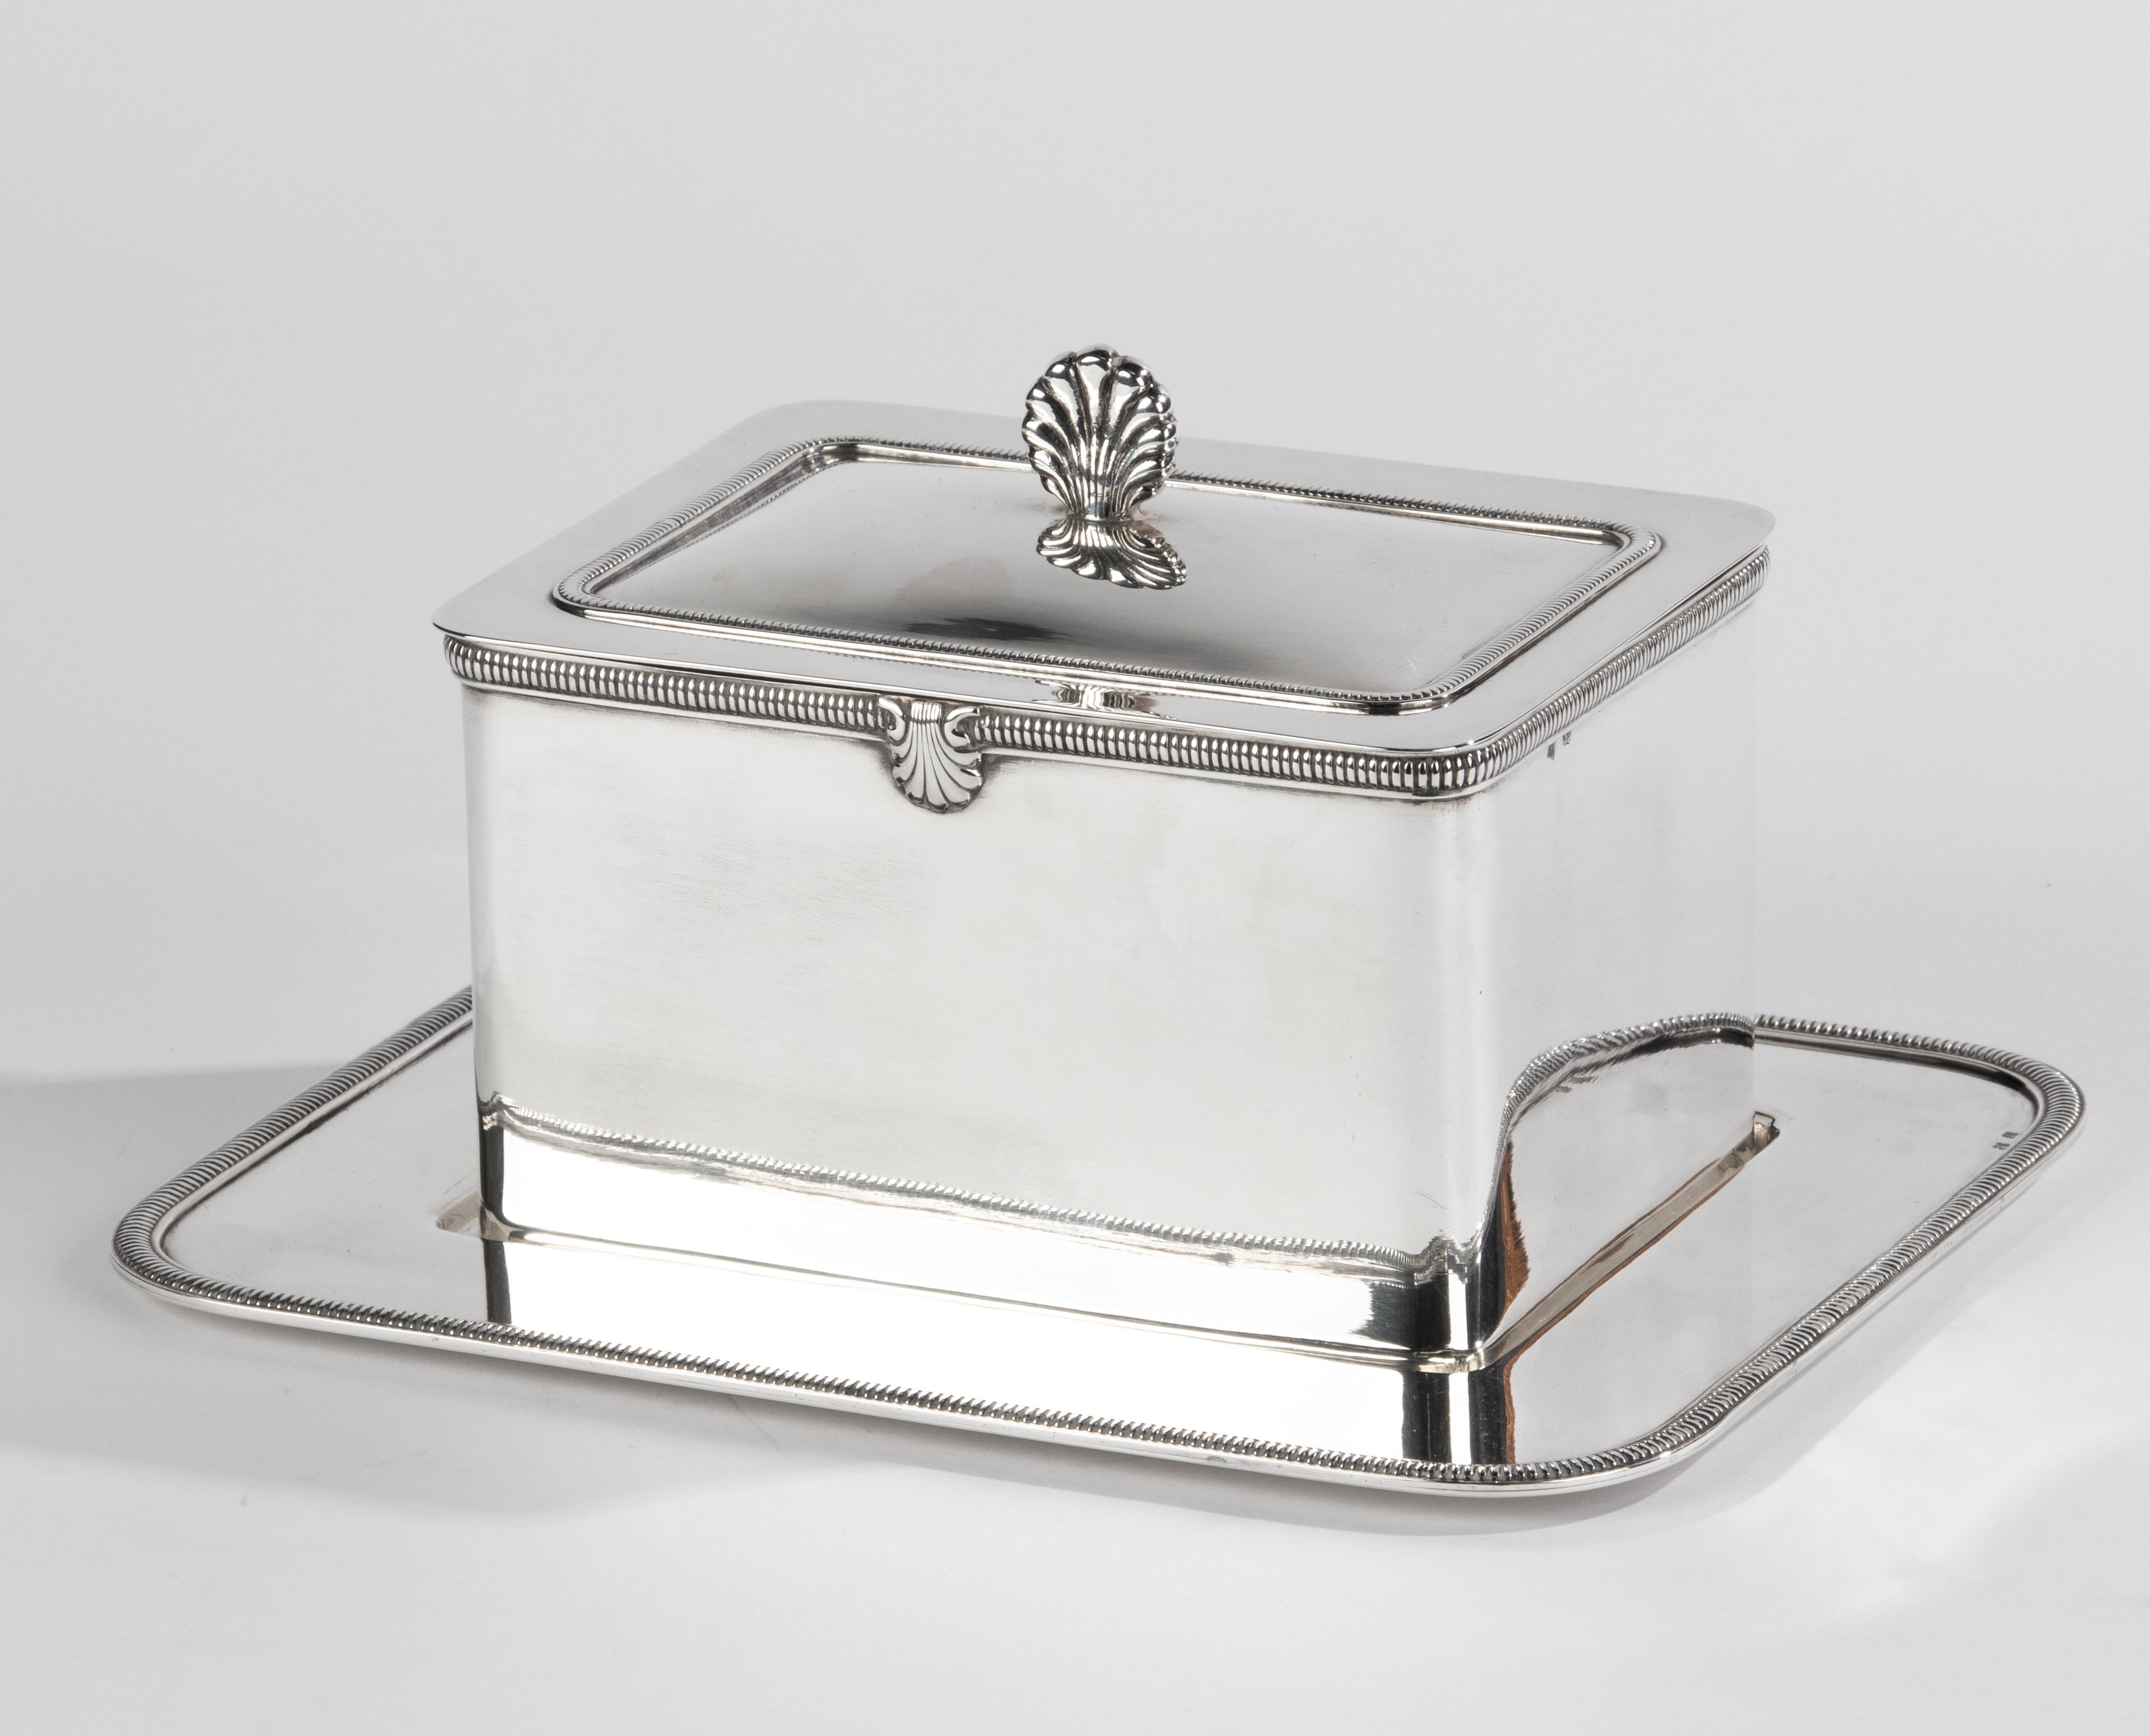 French Elegant Mid 20th Century Silver Plated Biscuit Barrel on Tray  For Sale